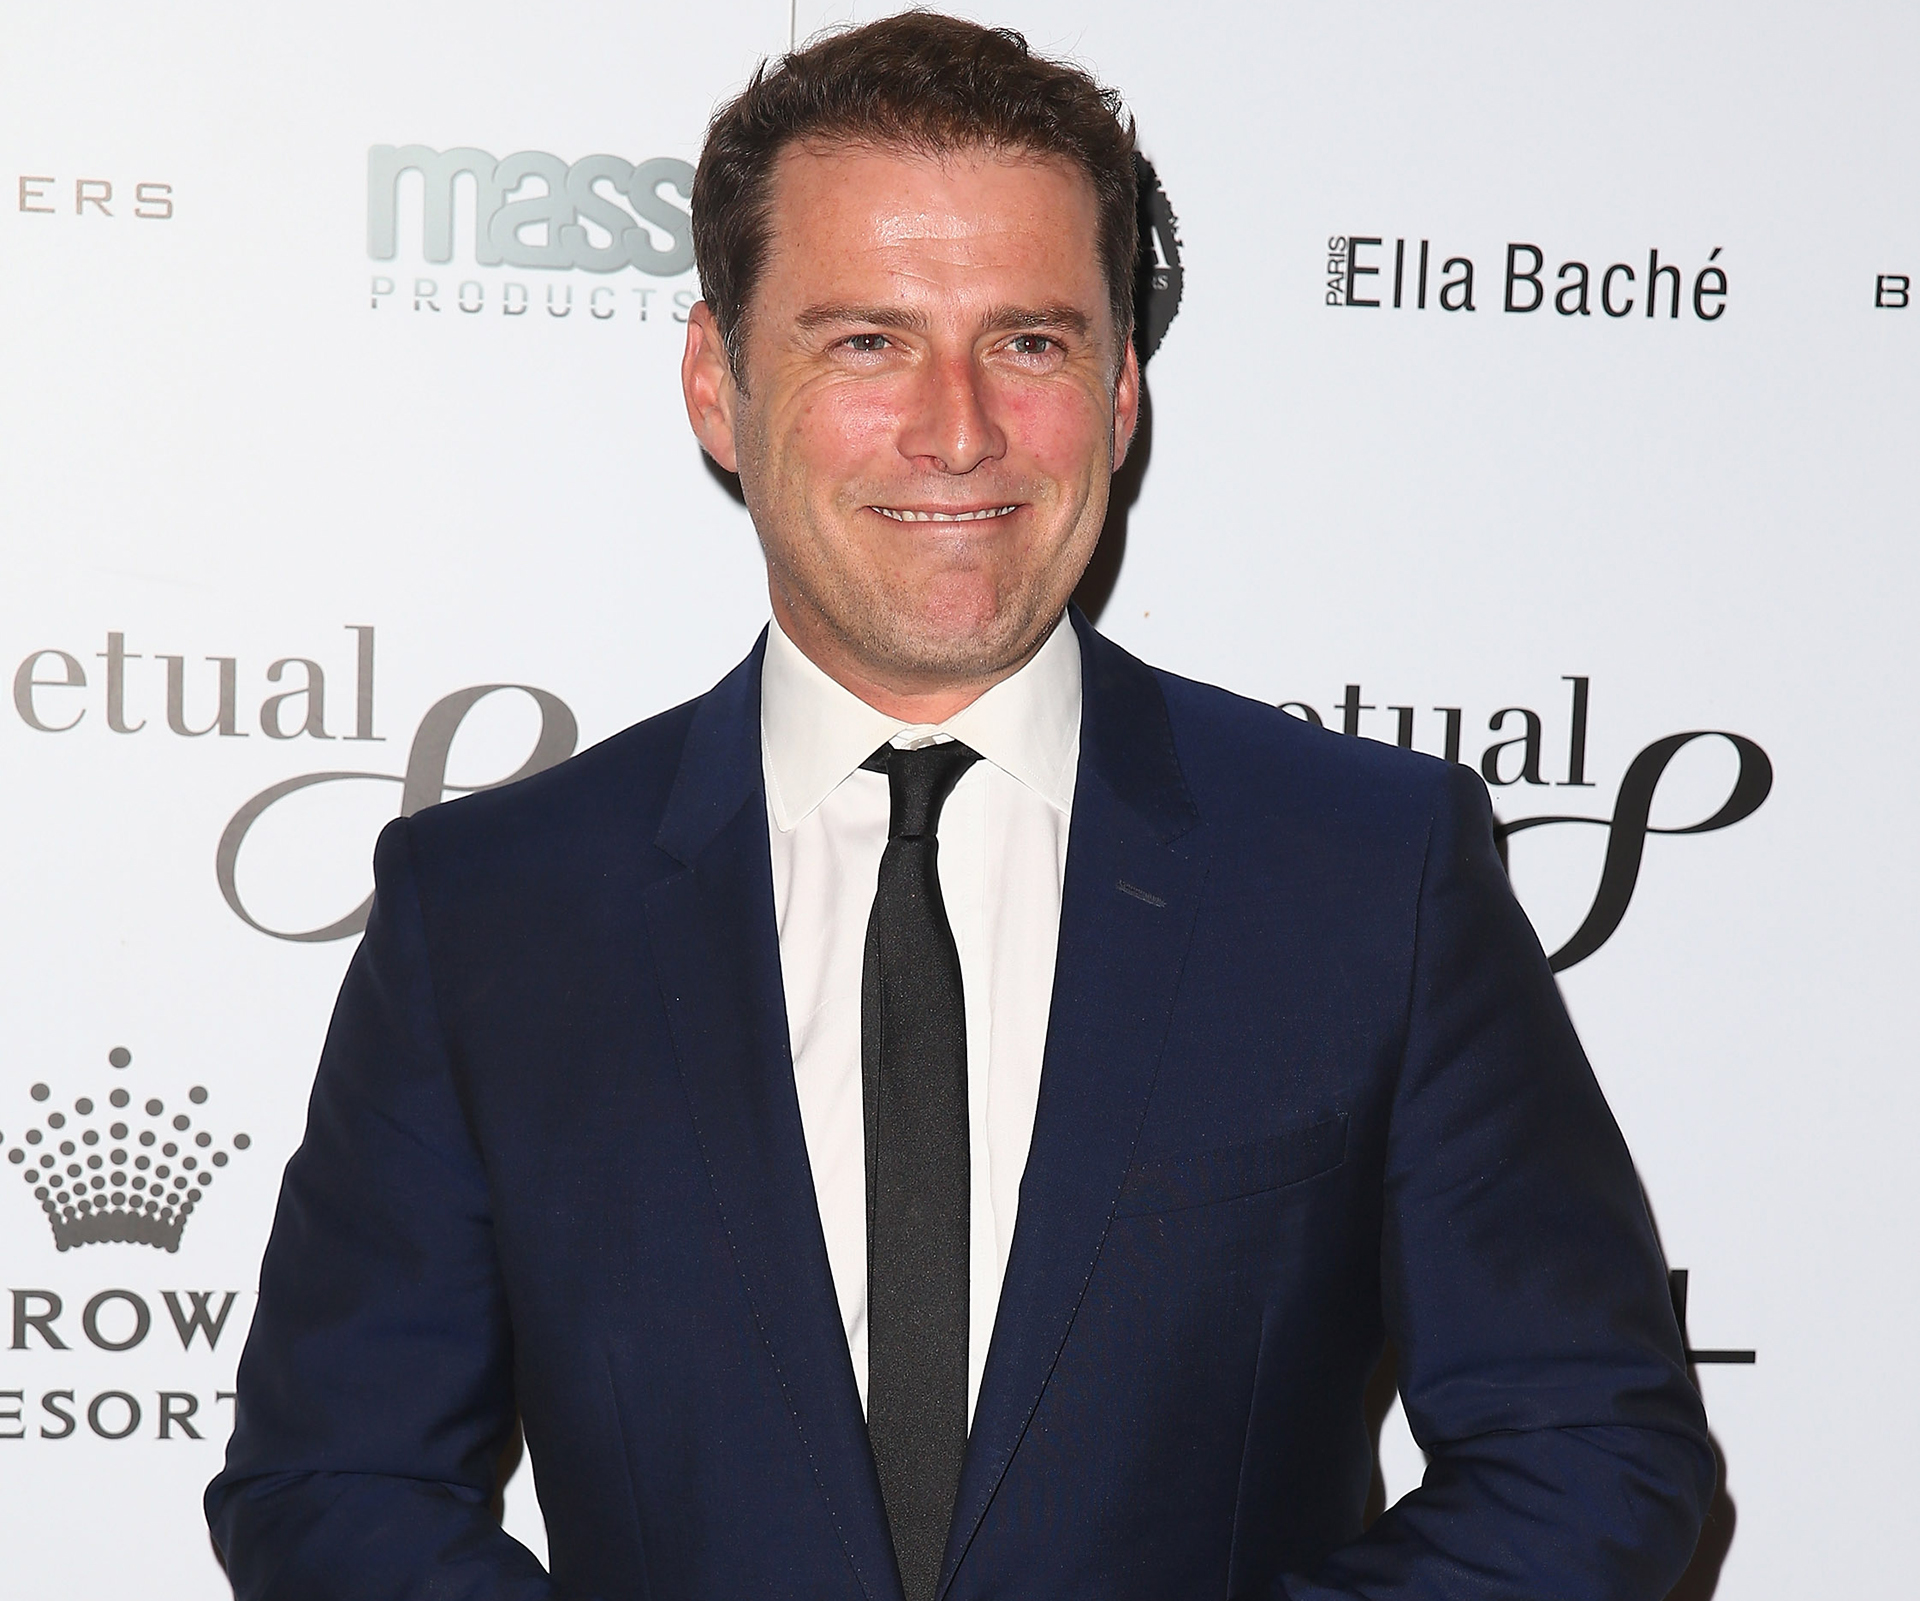 Karl Stefanovic apologises for transphobic comments made on TODAY